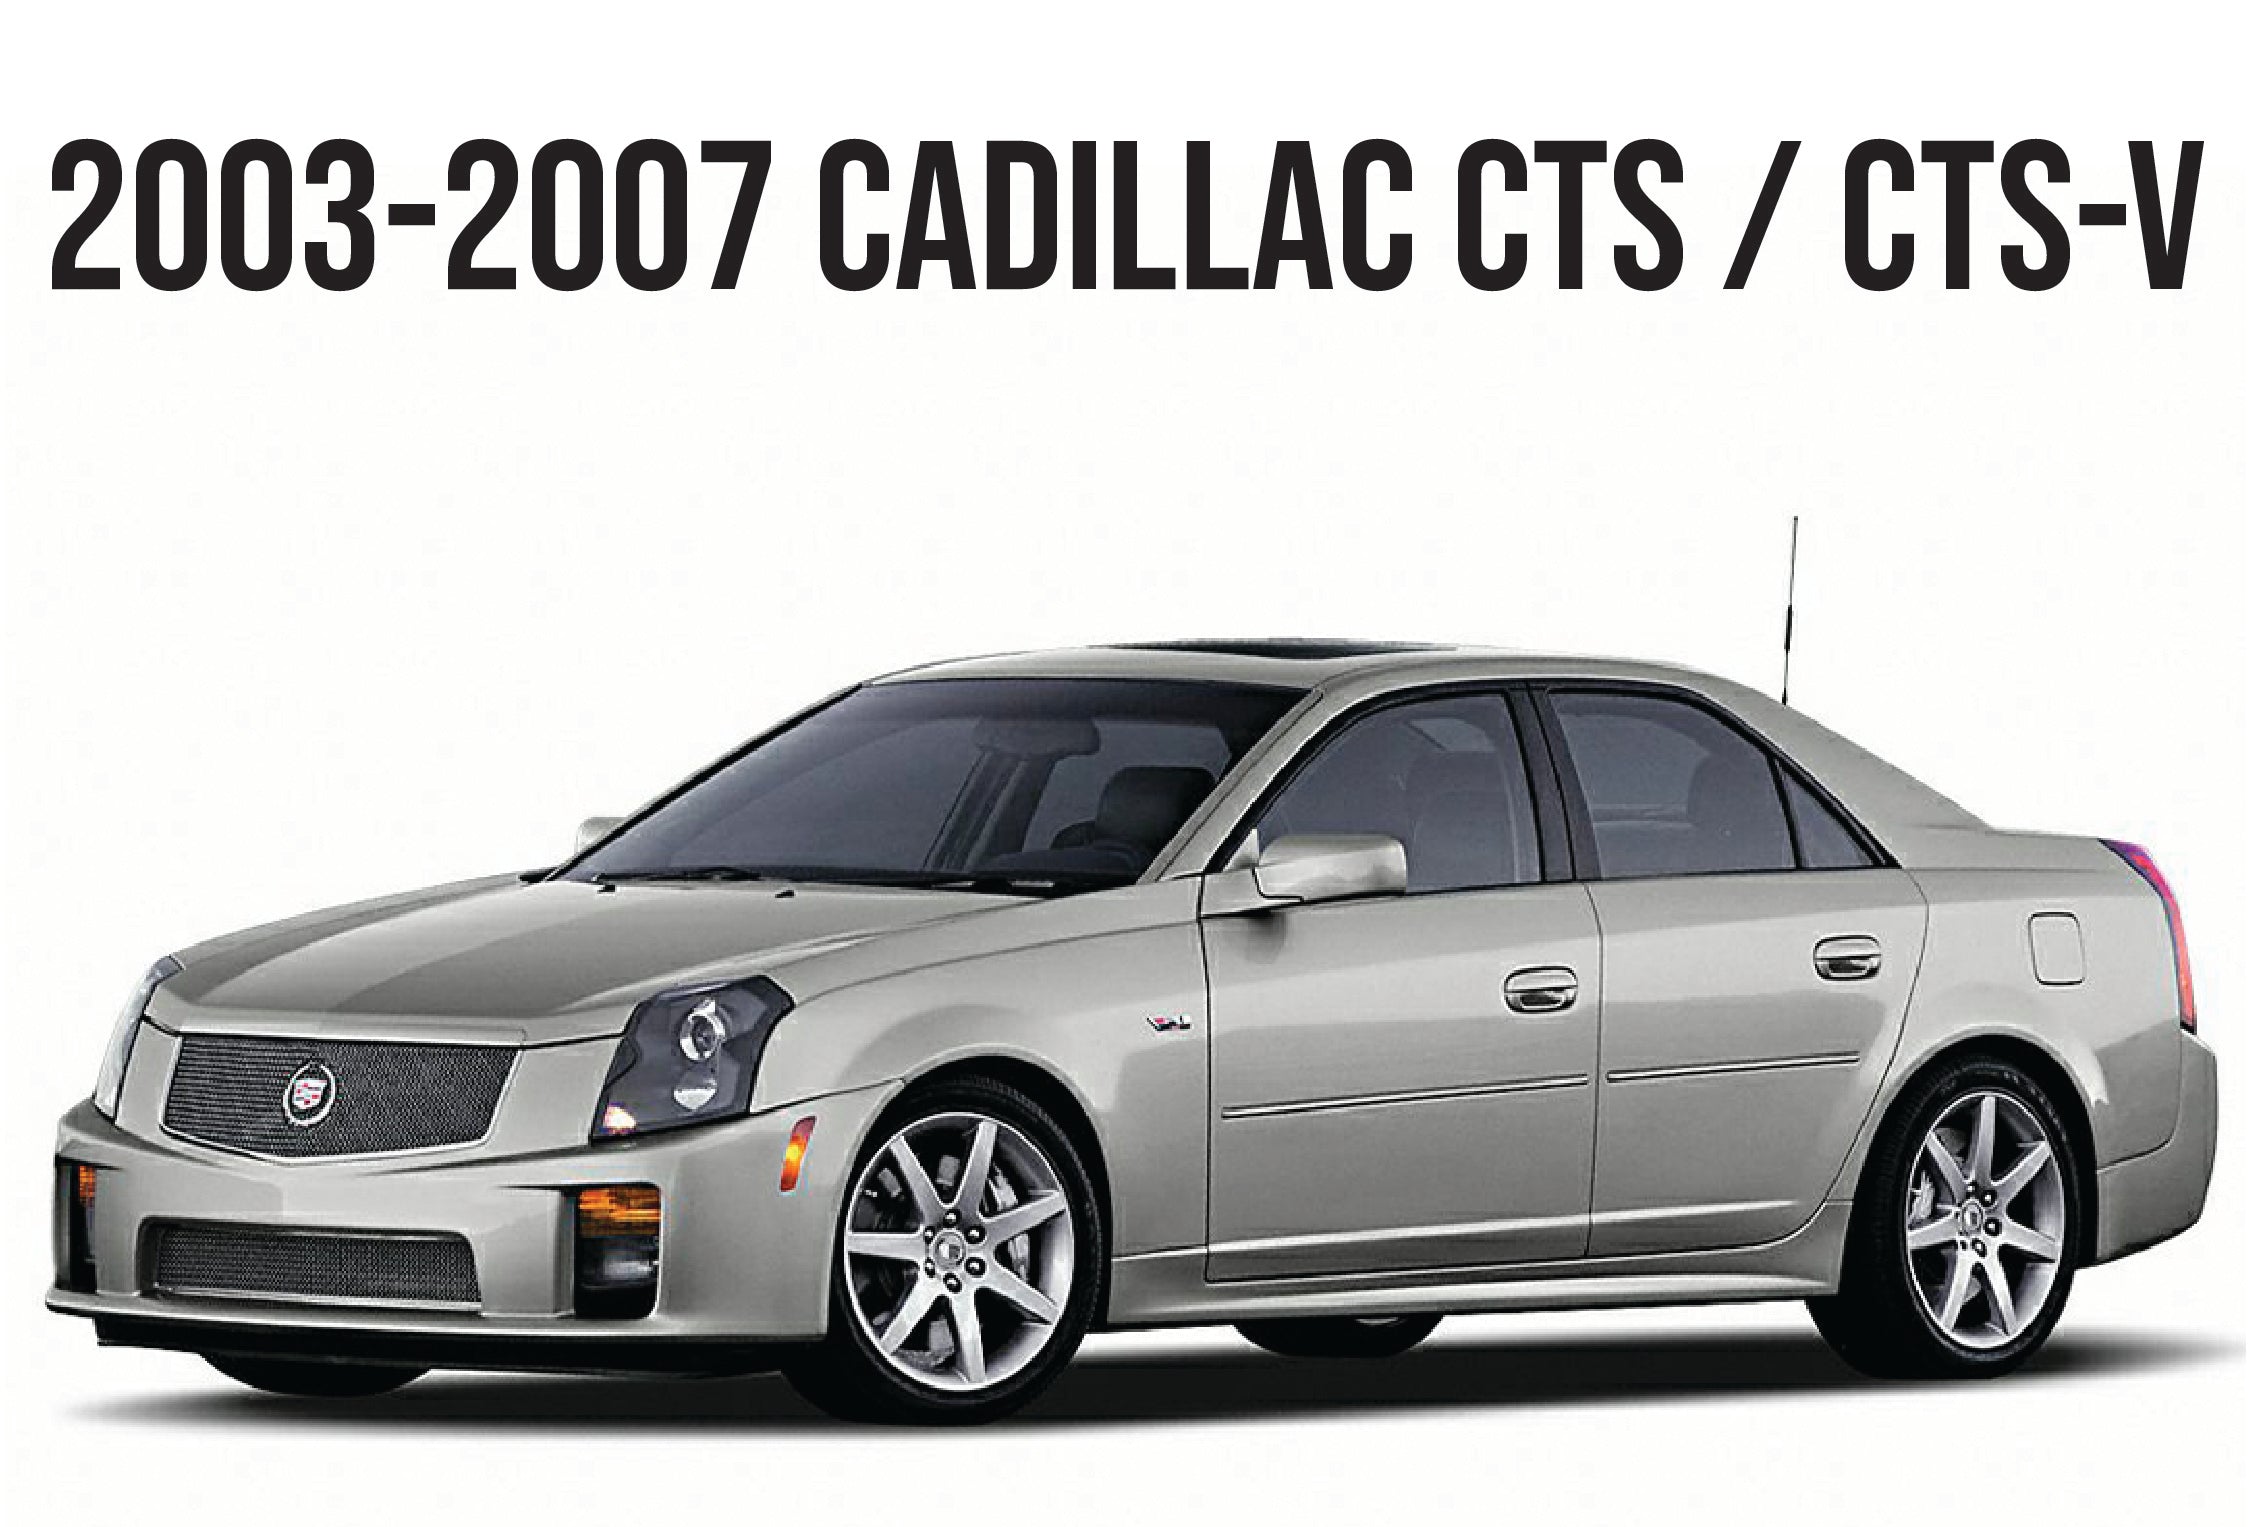 2003-2007 CADILLAC CTS / CTS-V-Unique Style Racing